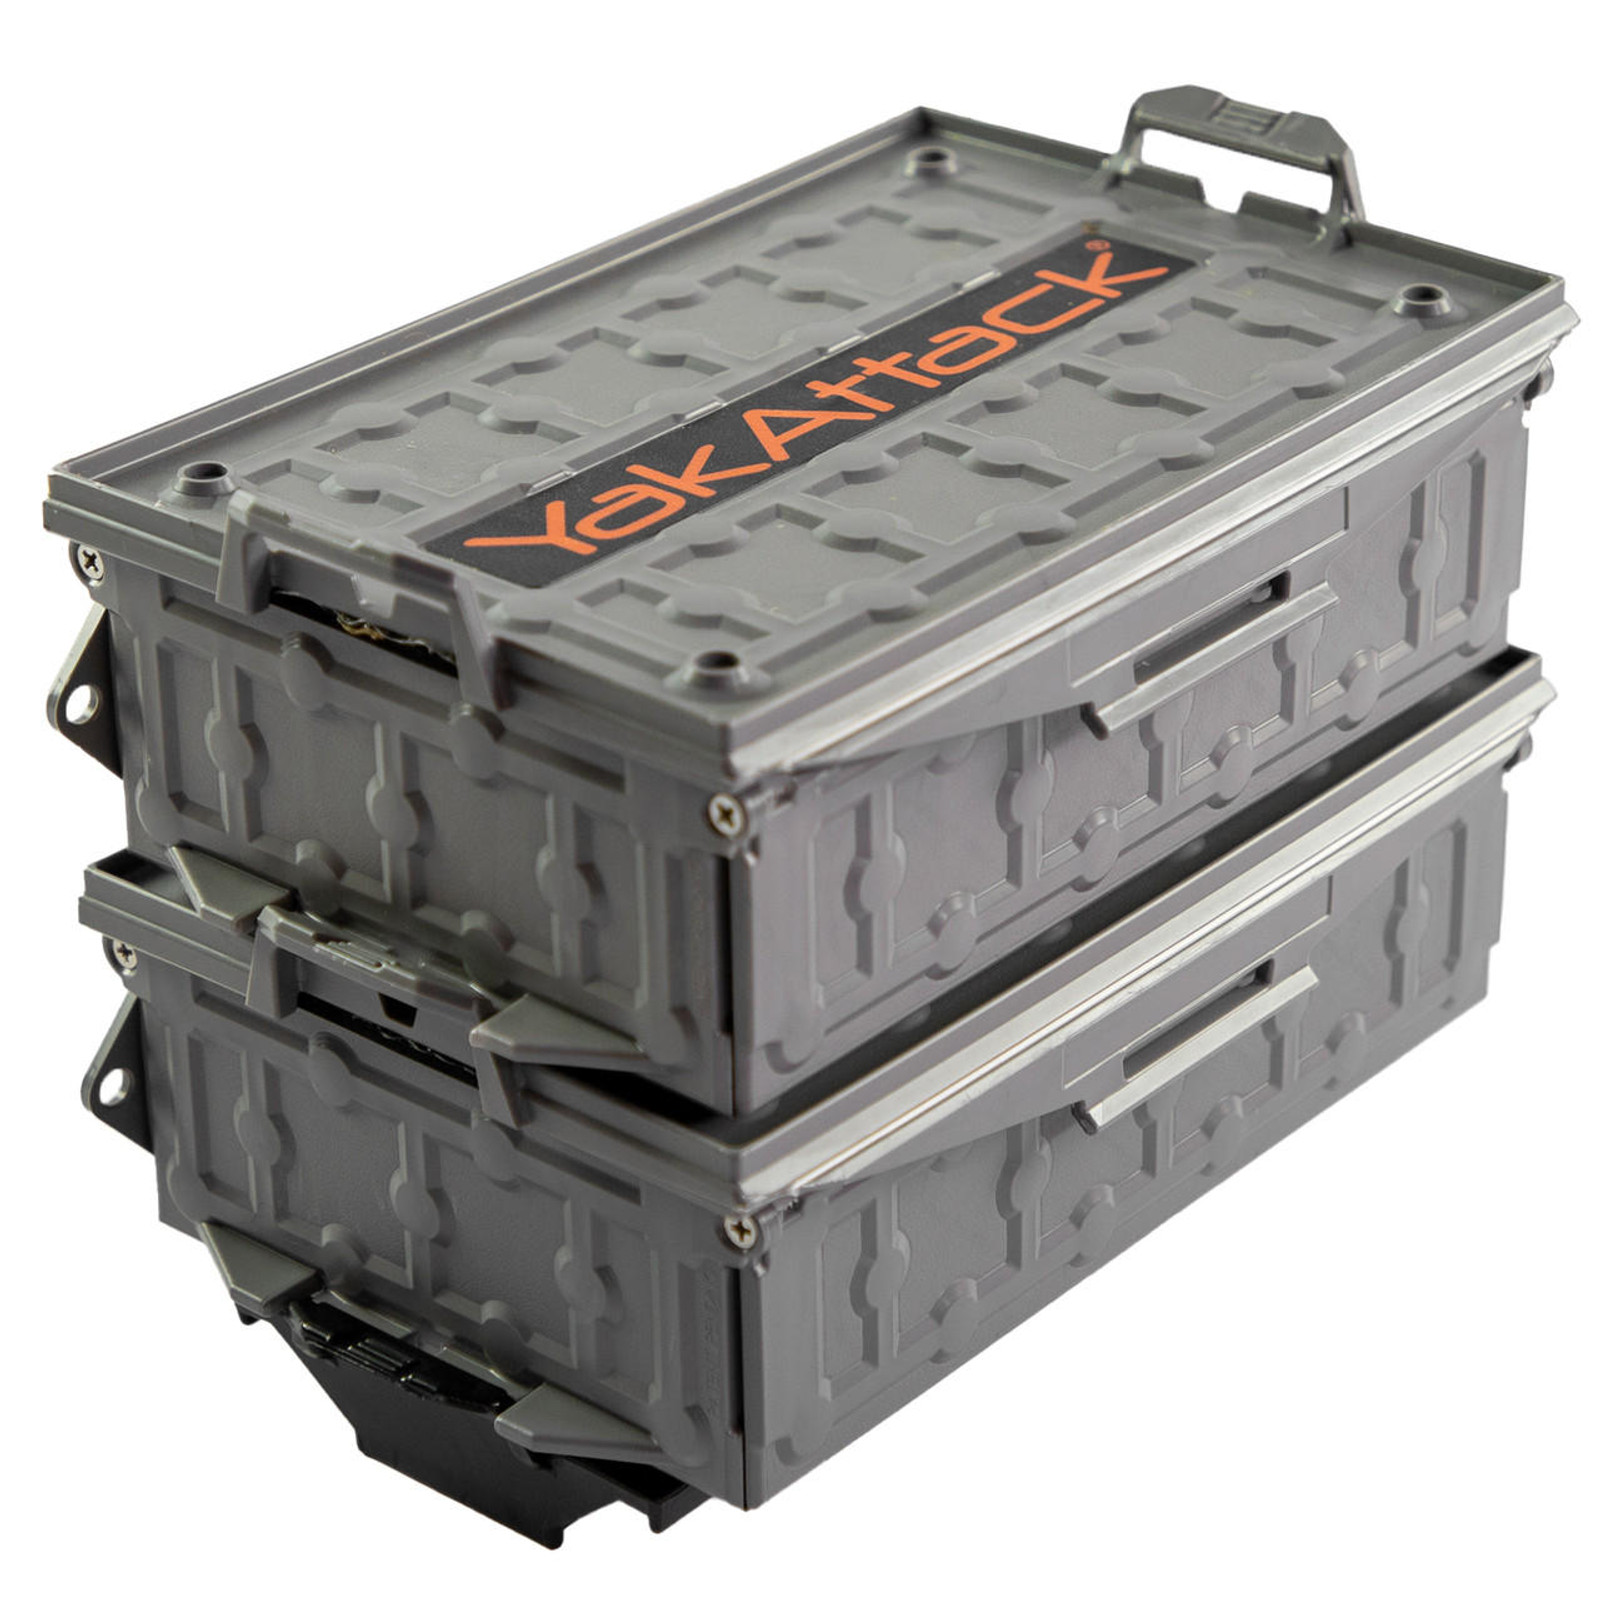  TracPak Combo Kit, Two Boxes and Quick Release Base, Battleship Grey 